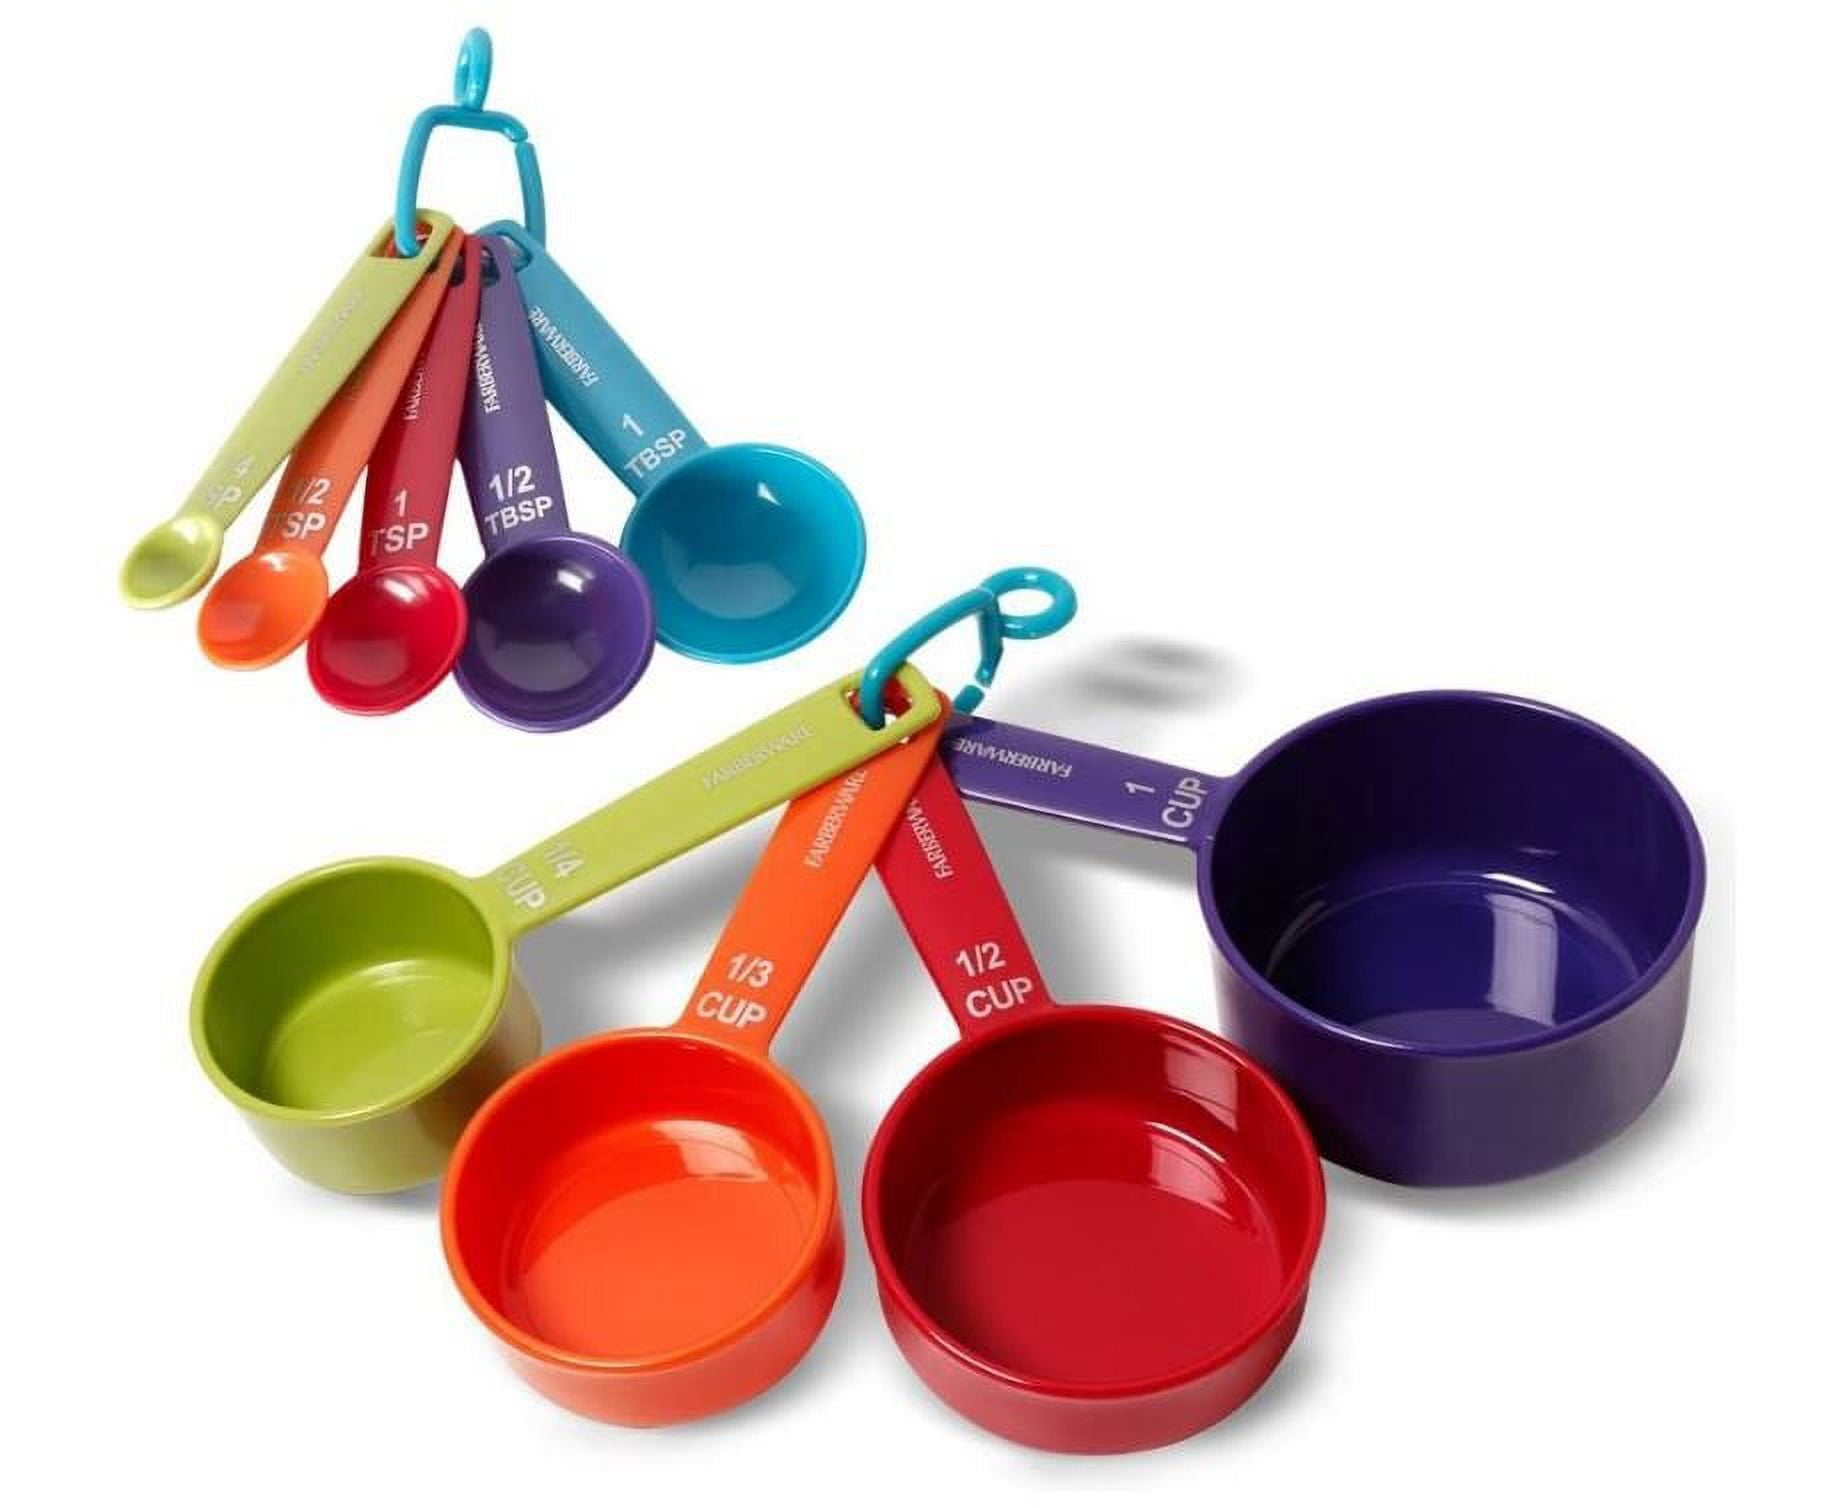 Plastic Measuring Cups and Spoons Set, Mixing Rainbow Colorful Measurement  Cups Spoons Set for Baking and Cooking, Kitchen 5 Measure Cups and 6 Spoons